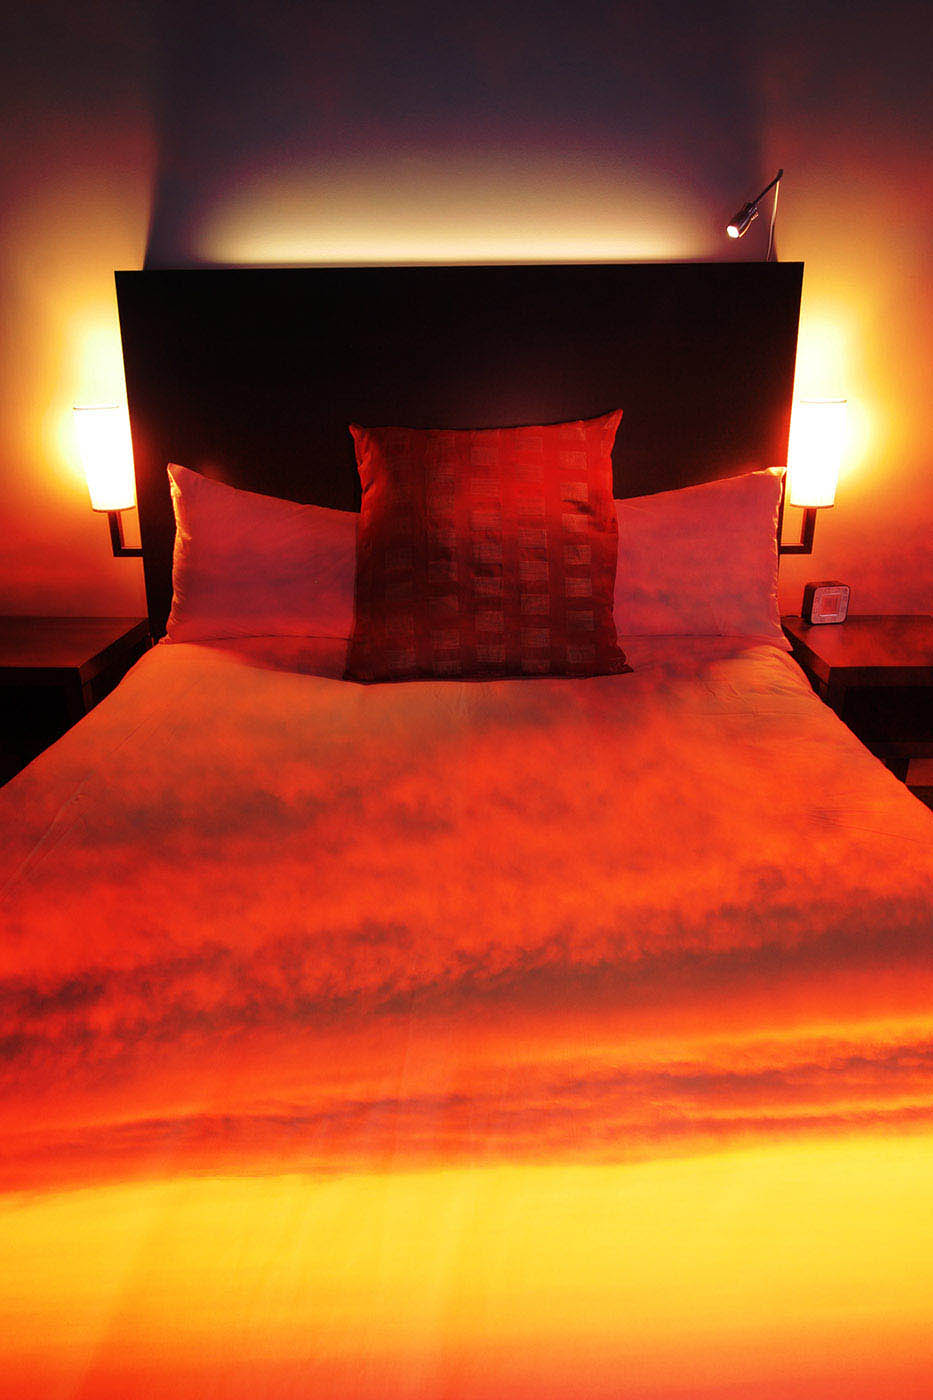 Sunset Bed Cover 2 - Stock Photo